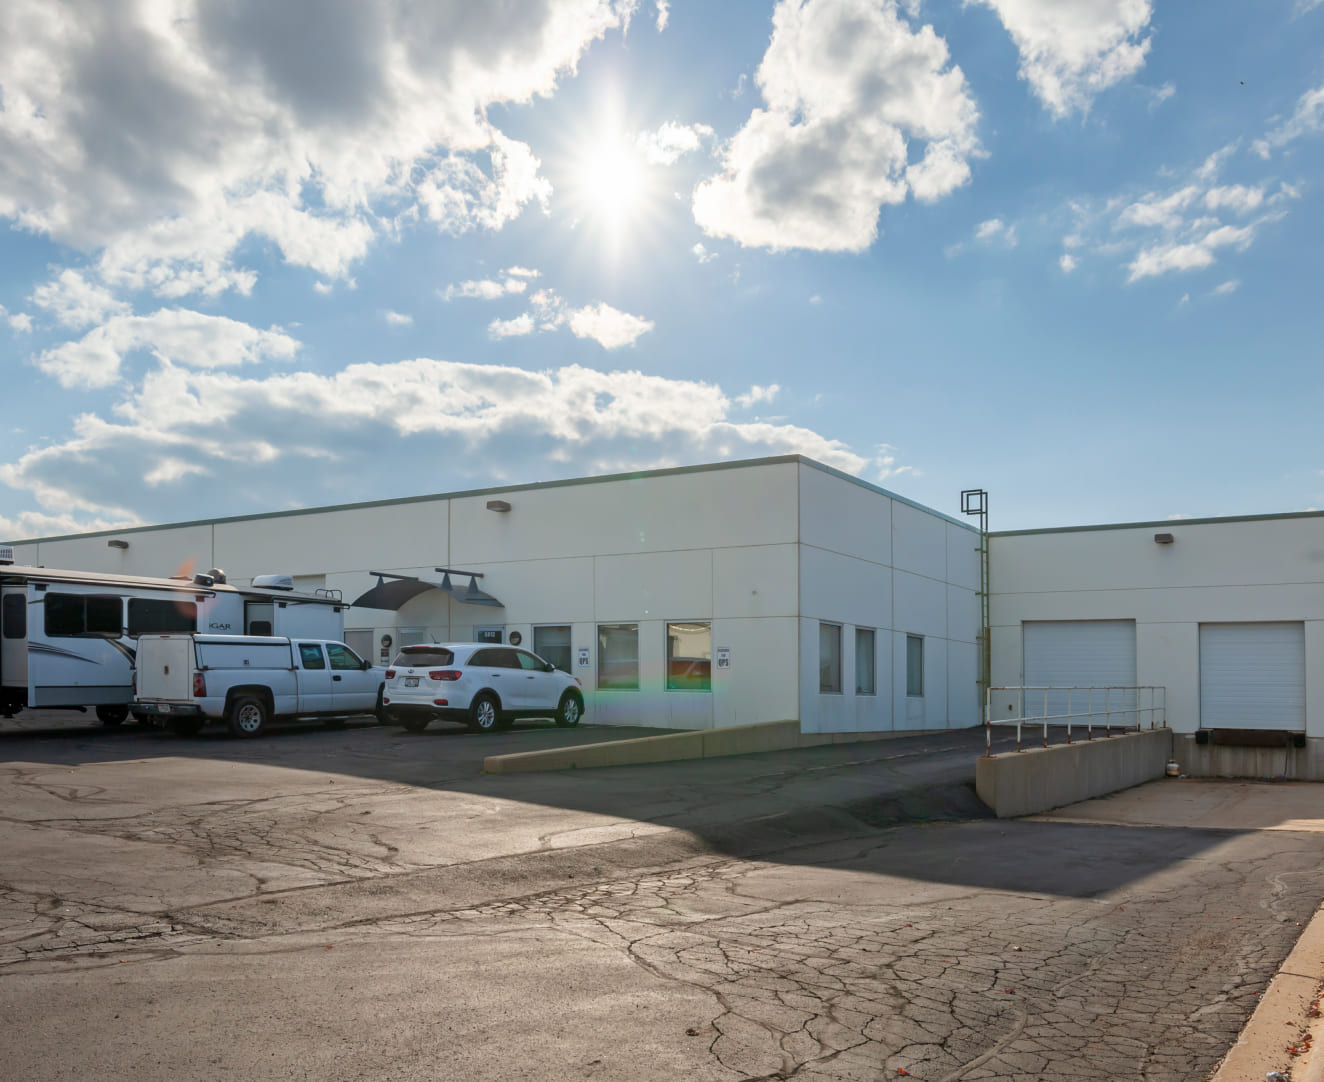 The loading docks and back parking lot at 5802-5820 Manufacturers Drive in Madison, WI.